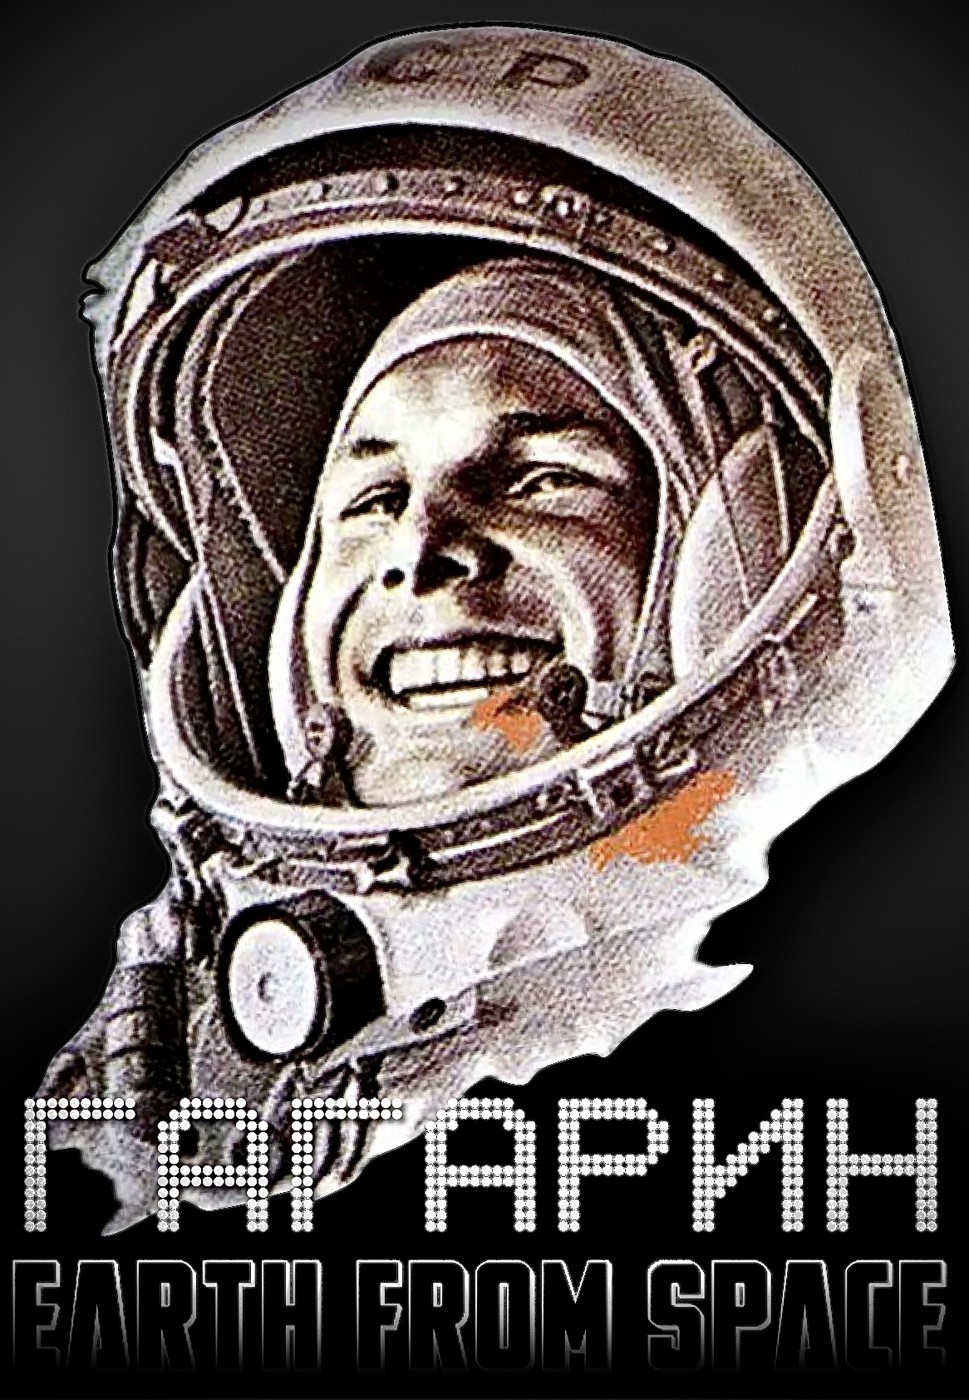 Gagarin DJ mix. Earth from space